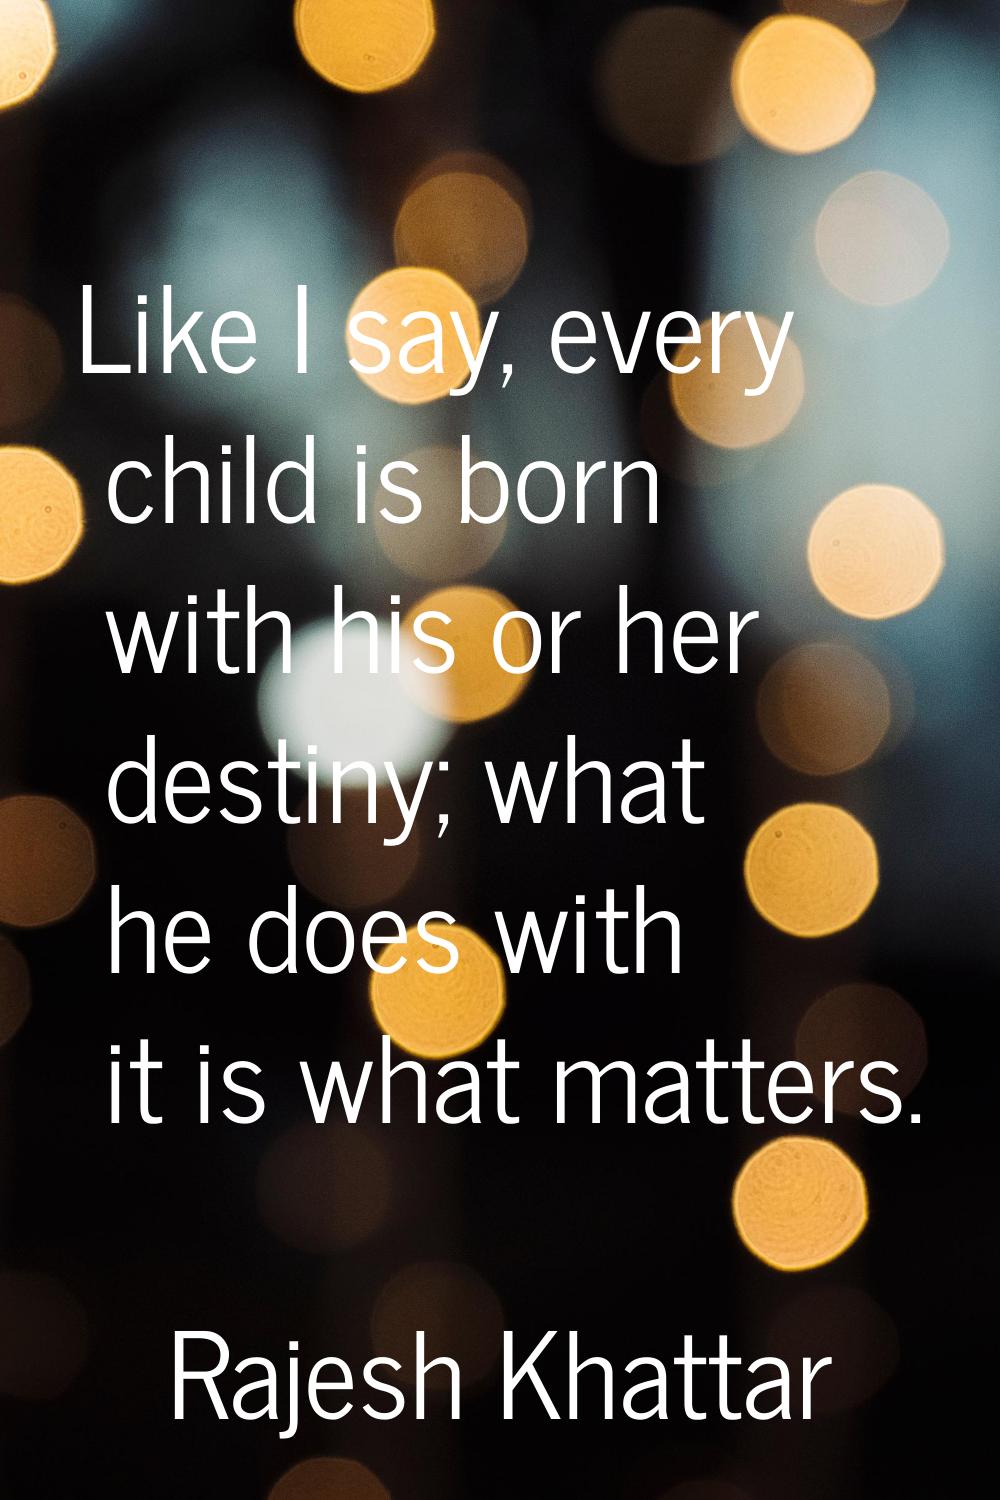 Like I say, every child is born with his or her destiny; what he does with it is what matters.